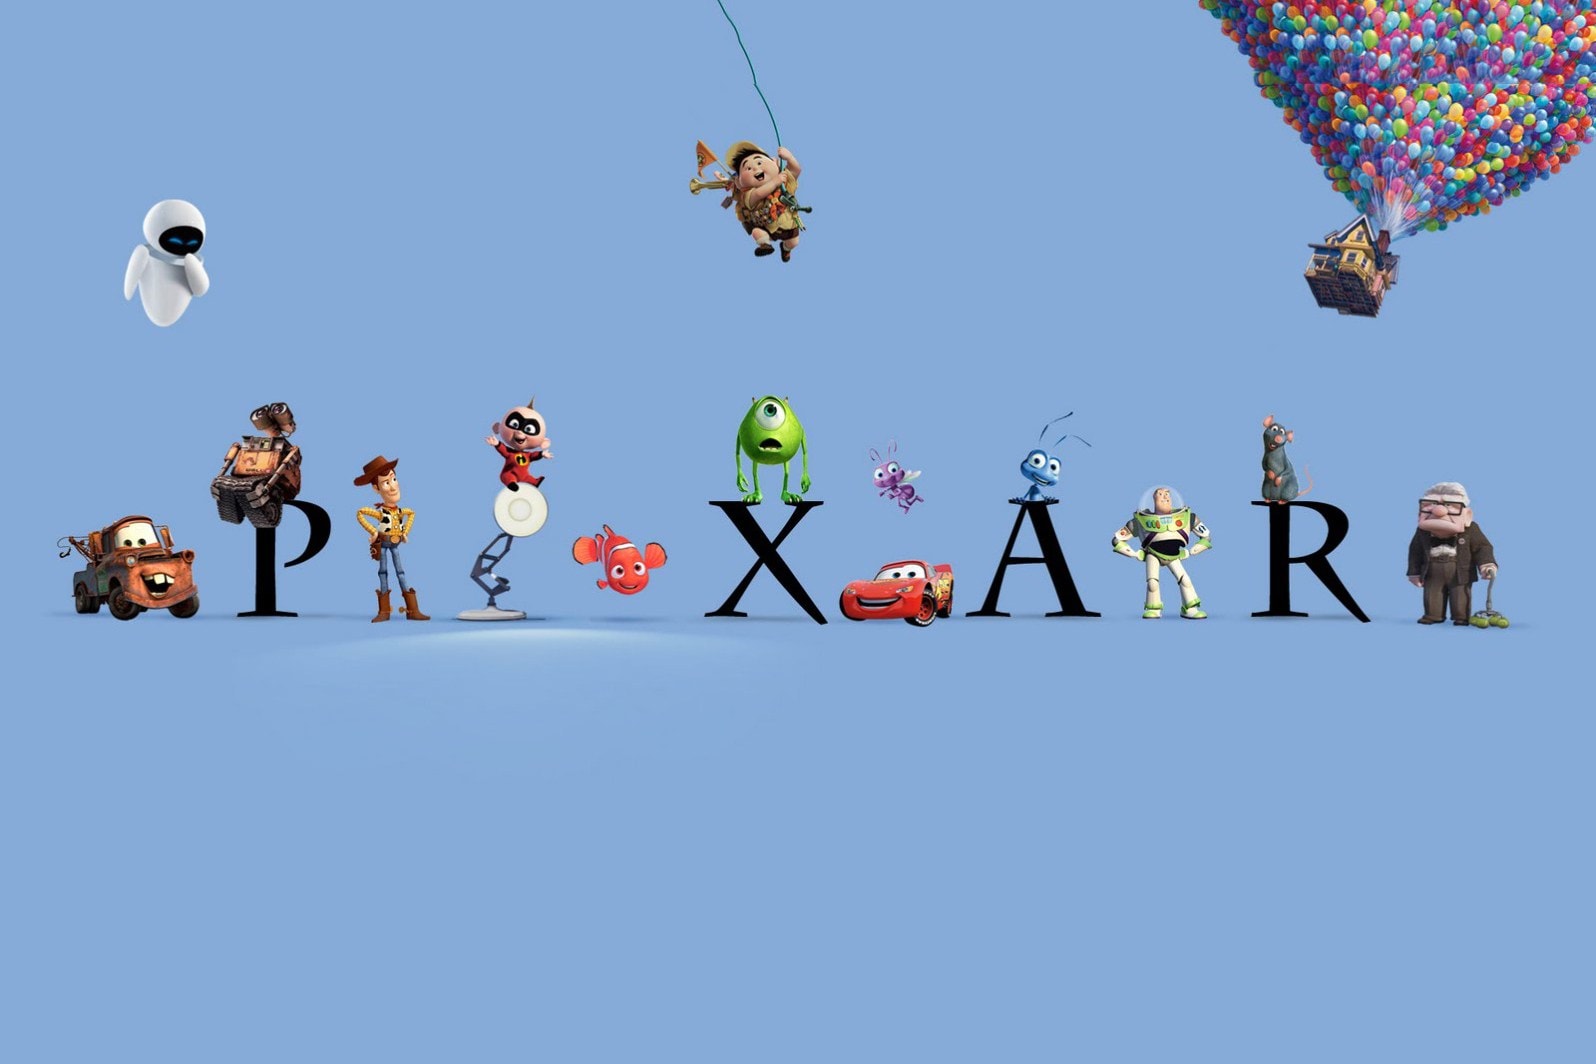 Disney+ Drops New Pixar Easter Egg-Filled Video disney plus videos animations 34th anniversary birthday toy story inside out cars mcqueen